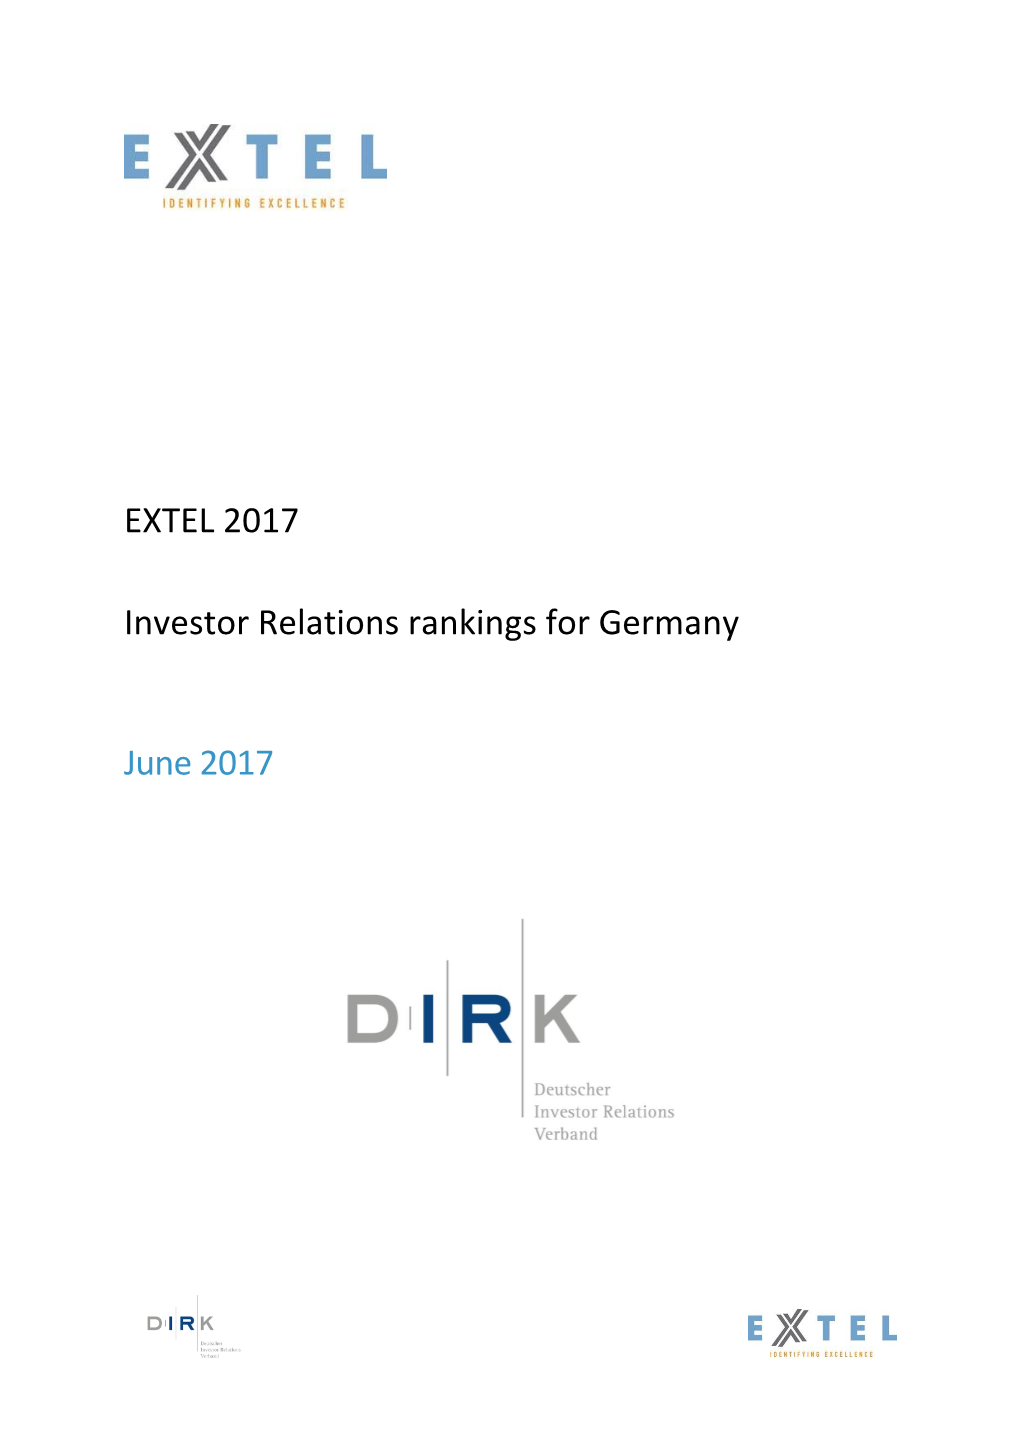 EXTEL 2017 Investor Relations Rankings for Germany